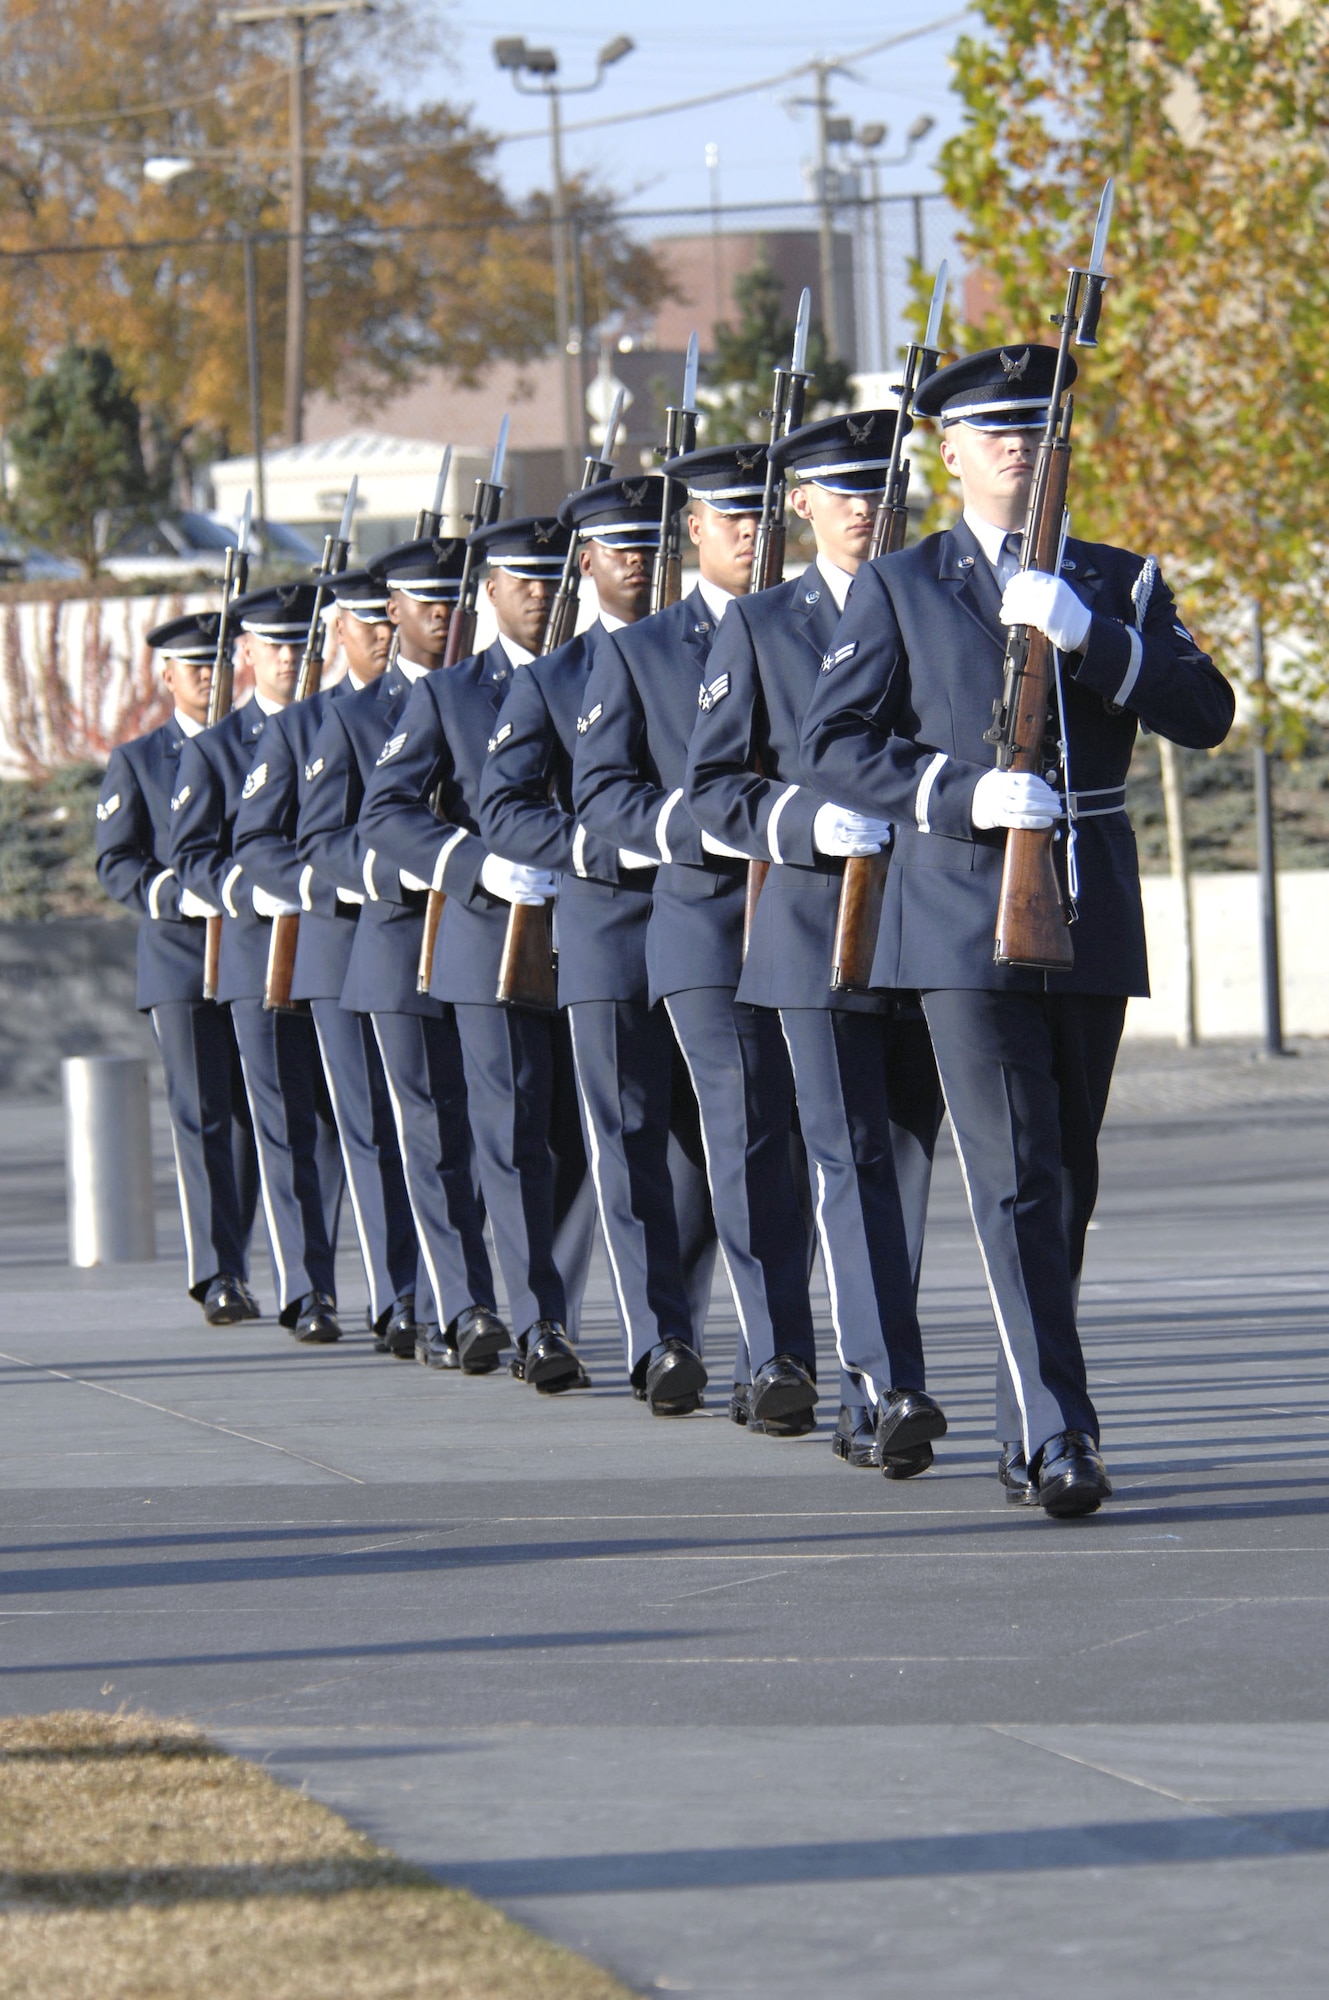 United States Air Force Honor Guard members from Bolling Air Force Base, move in formation during a memorial ceremony Nov. 10 in Arlington, Va. (U.S. Air Force photo/Tech. Sgt. Cohen Young)